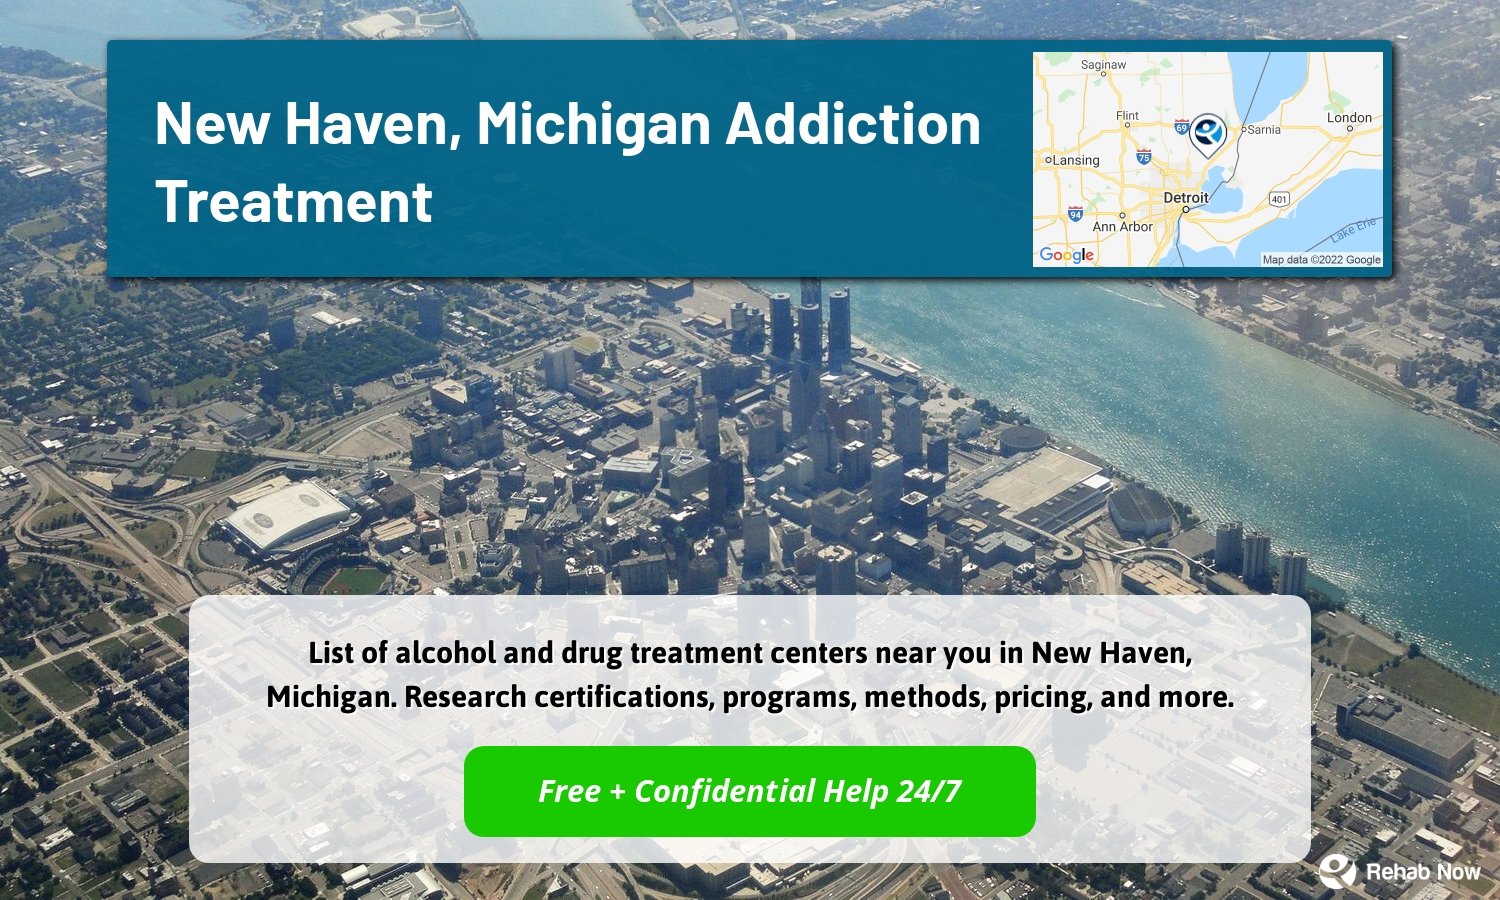 List of alcohol and drug treatment centers near you in New Haven, Michigan. Research certifications, programs, methods, pricing, and more.